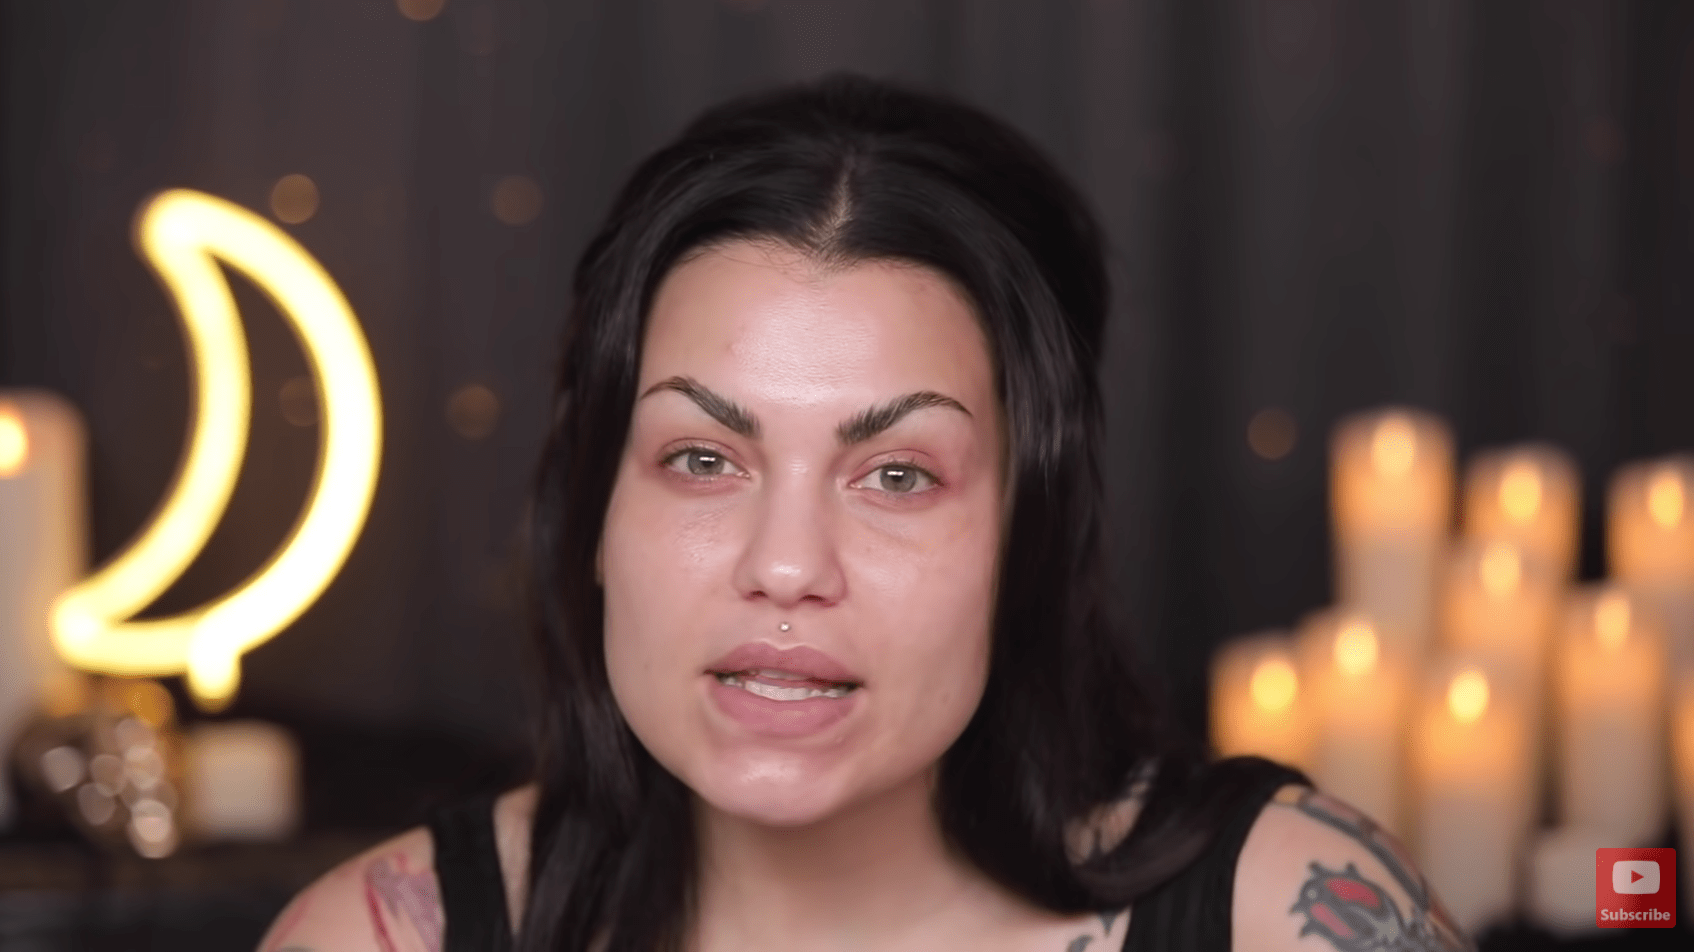 Meet Bailey Sarian, The Woman Who Does Her Makeup While She Discusses